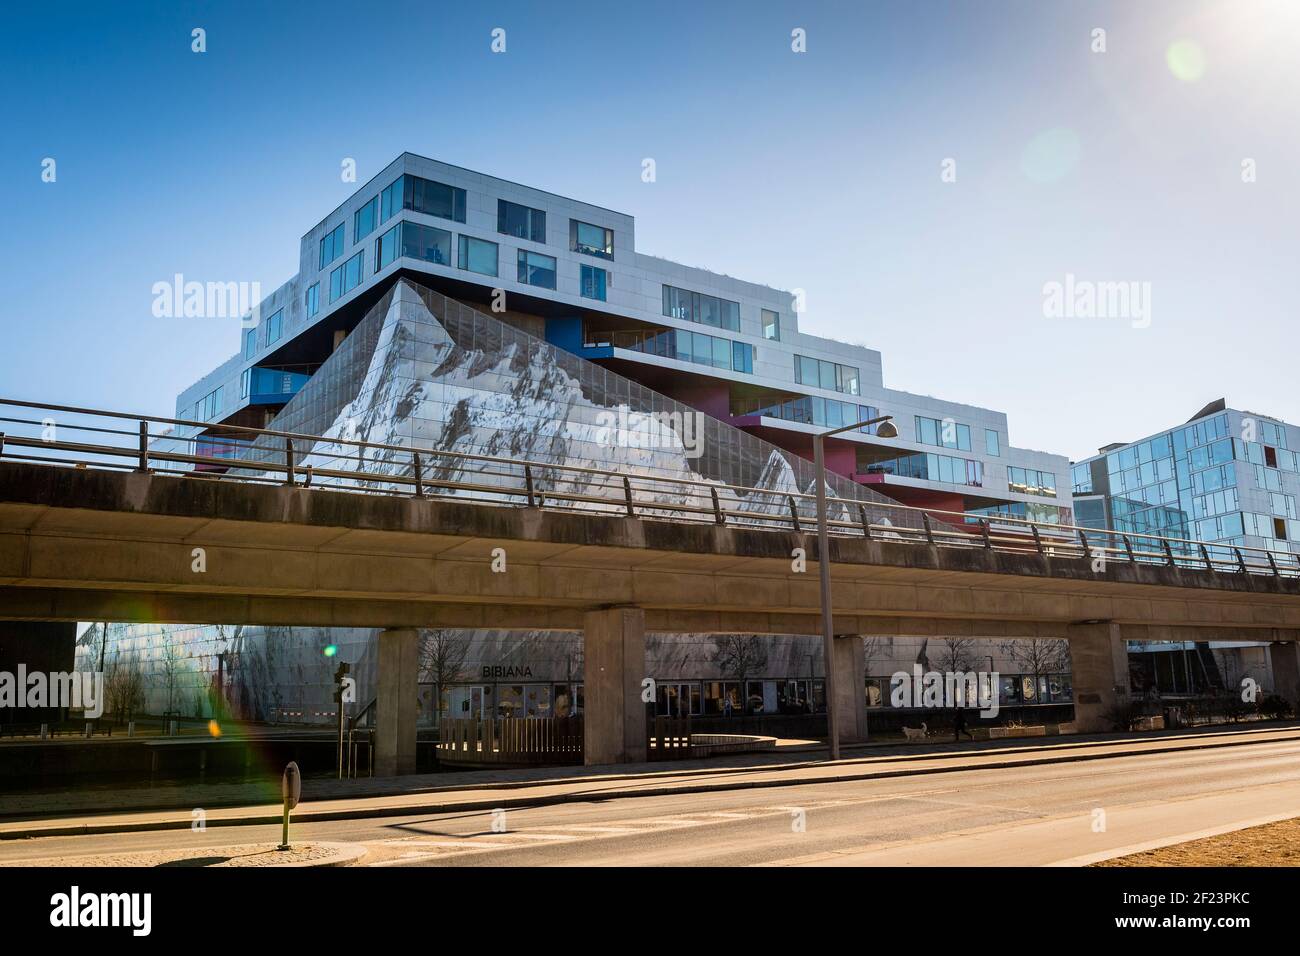 Mountain Dwellings (Danish: Bjerget) is a building in the Ørestad district of Copenhagen, Denmark, consisting of apartments above a multi-story car pa Stock Photo